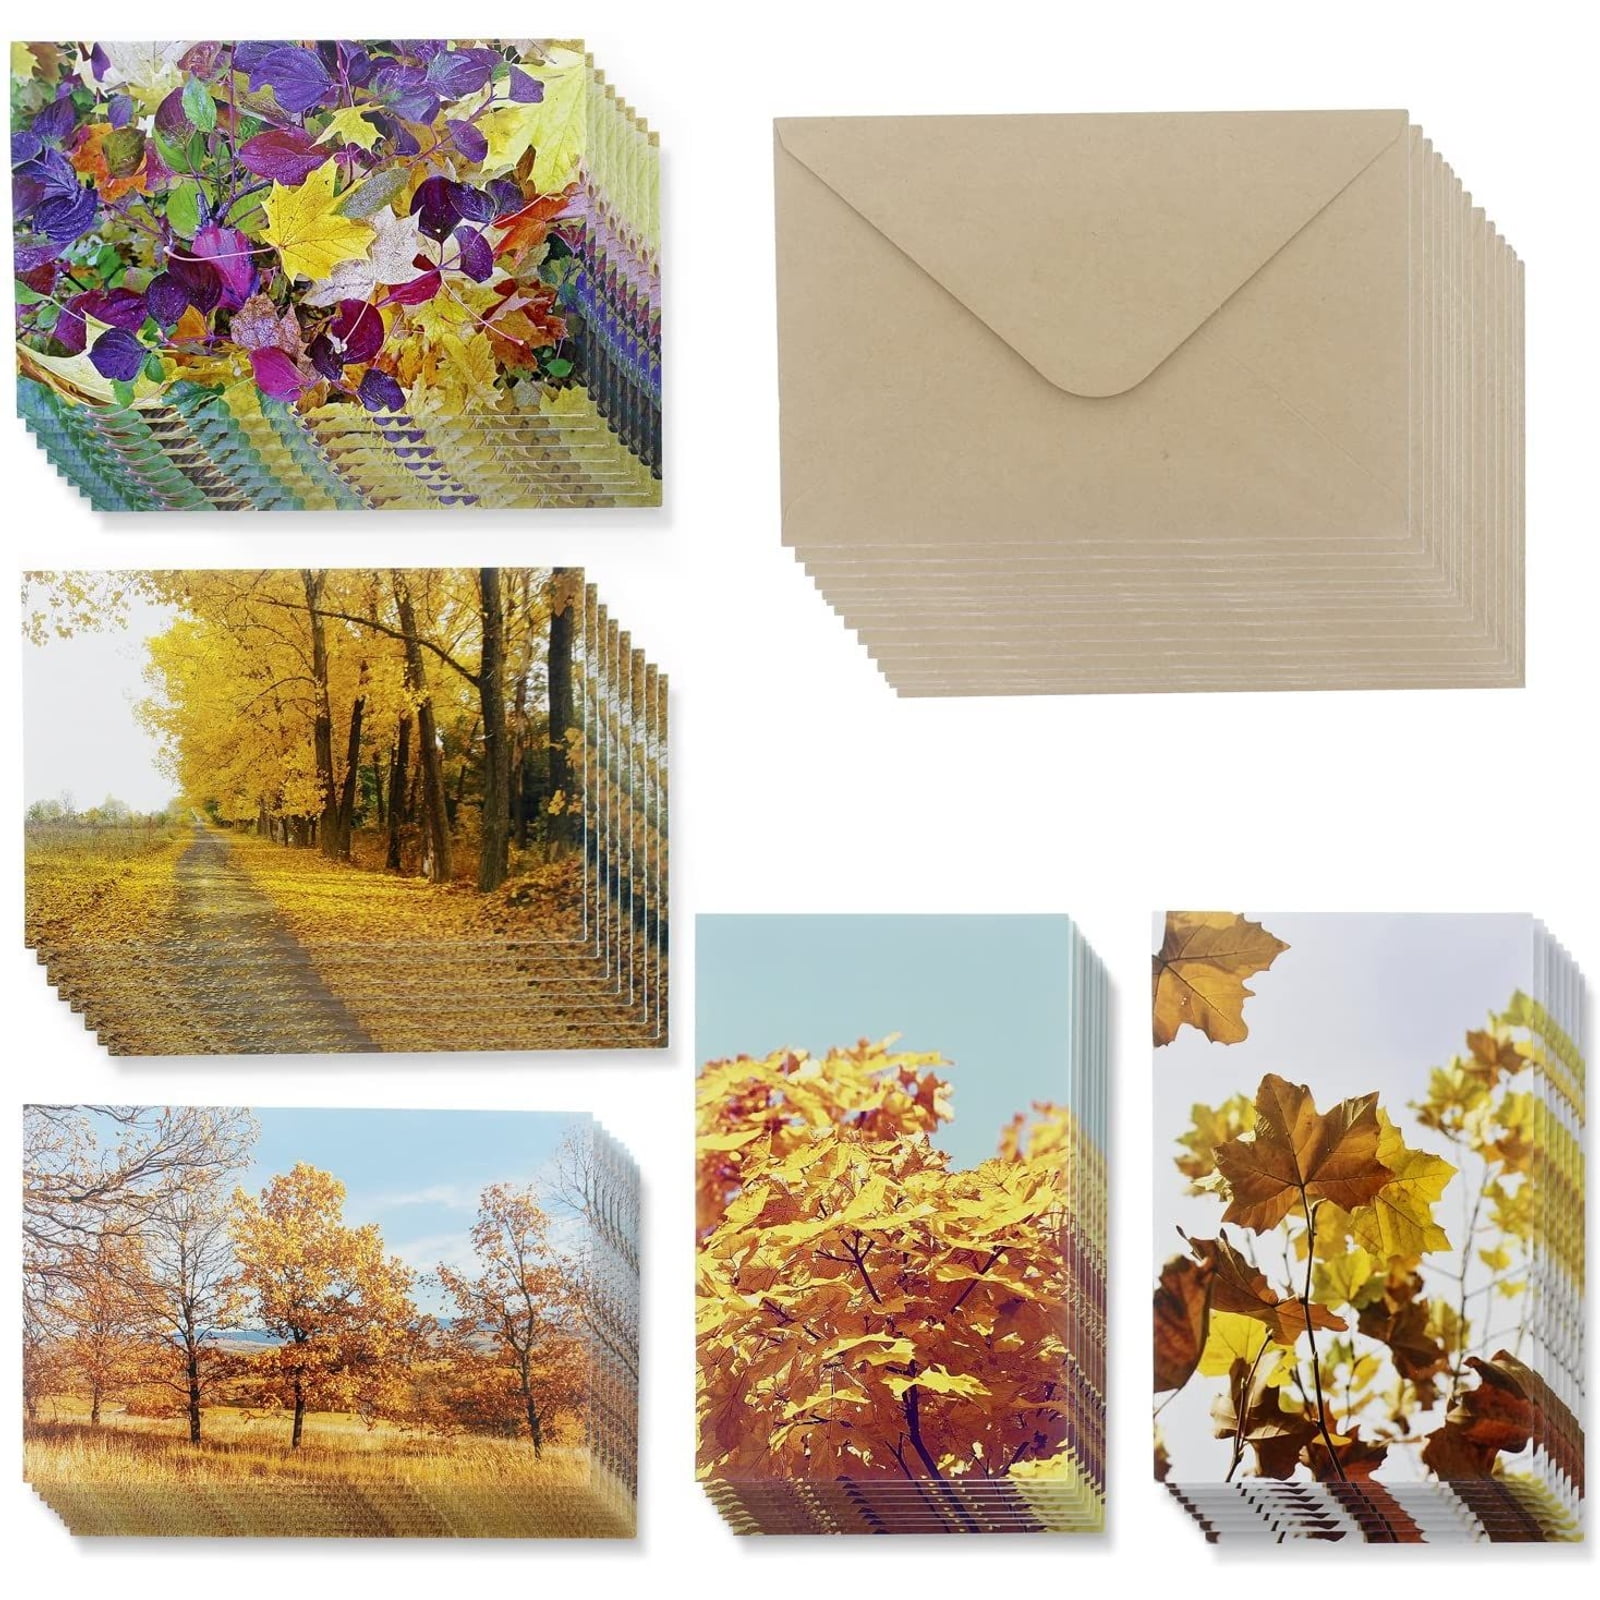 48 Pack All Occasion Greeting Cards Assorted Blank Note Cards Bulk Box Set Cosmic Designs Envelopes Included 4 x 6 Inches 